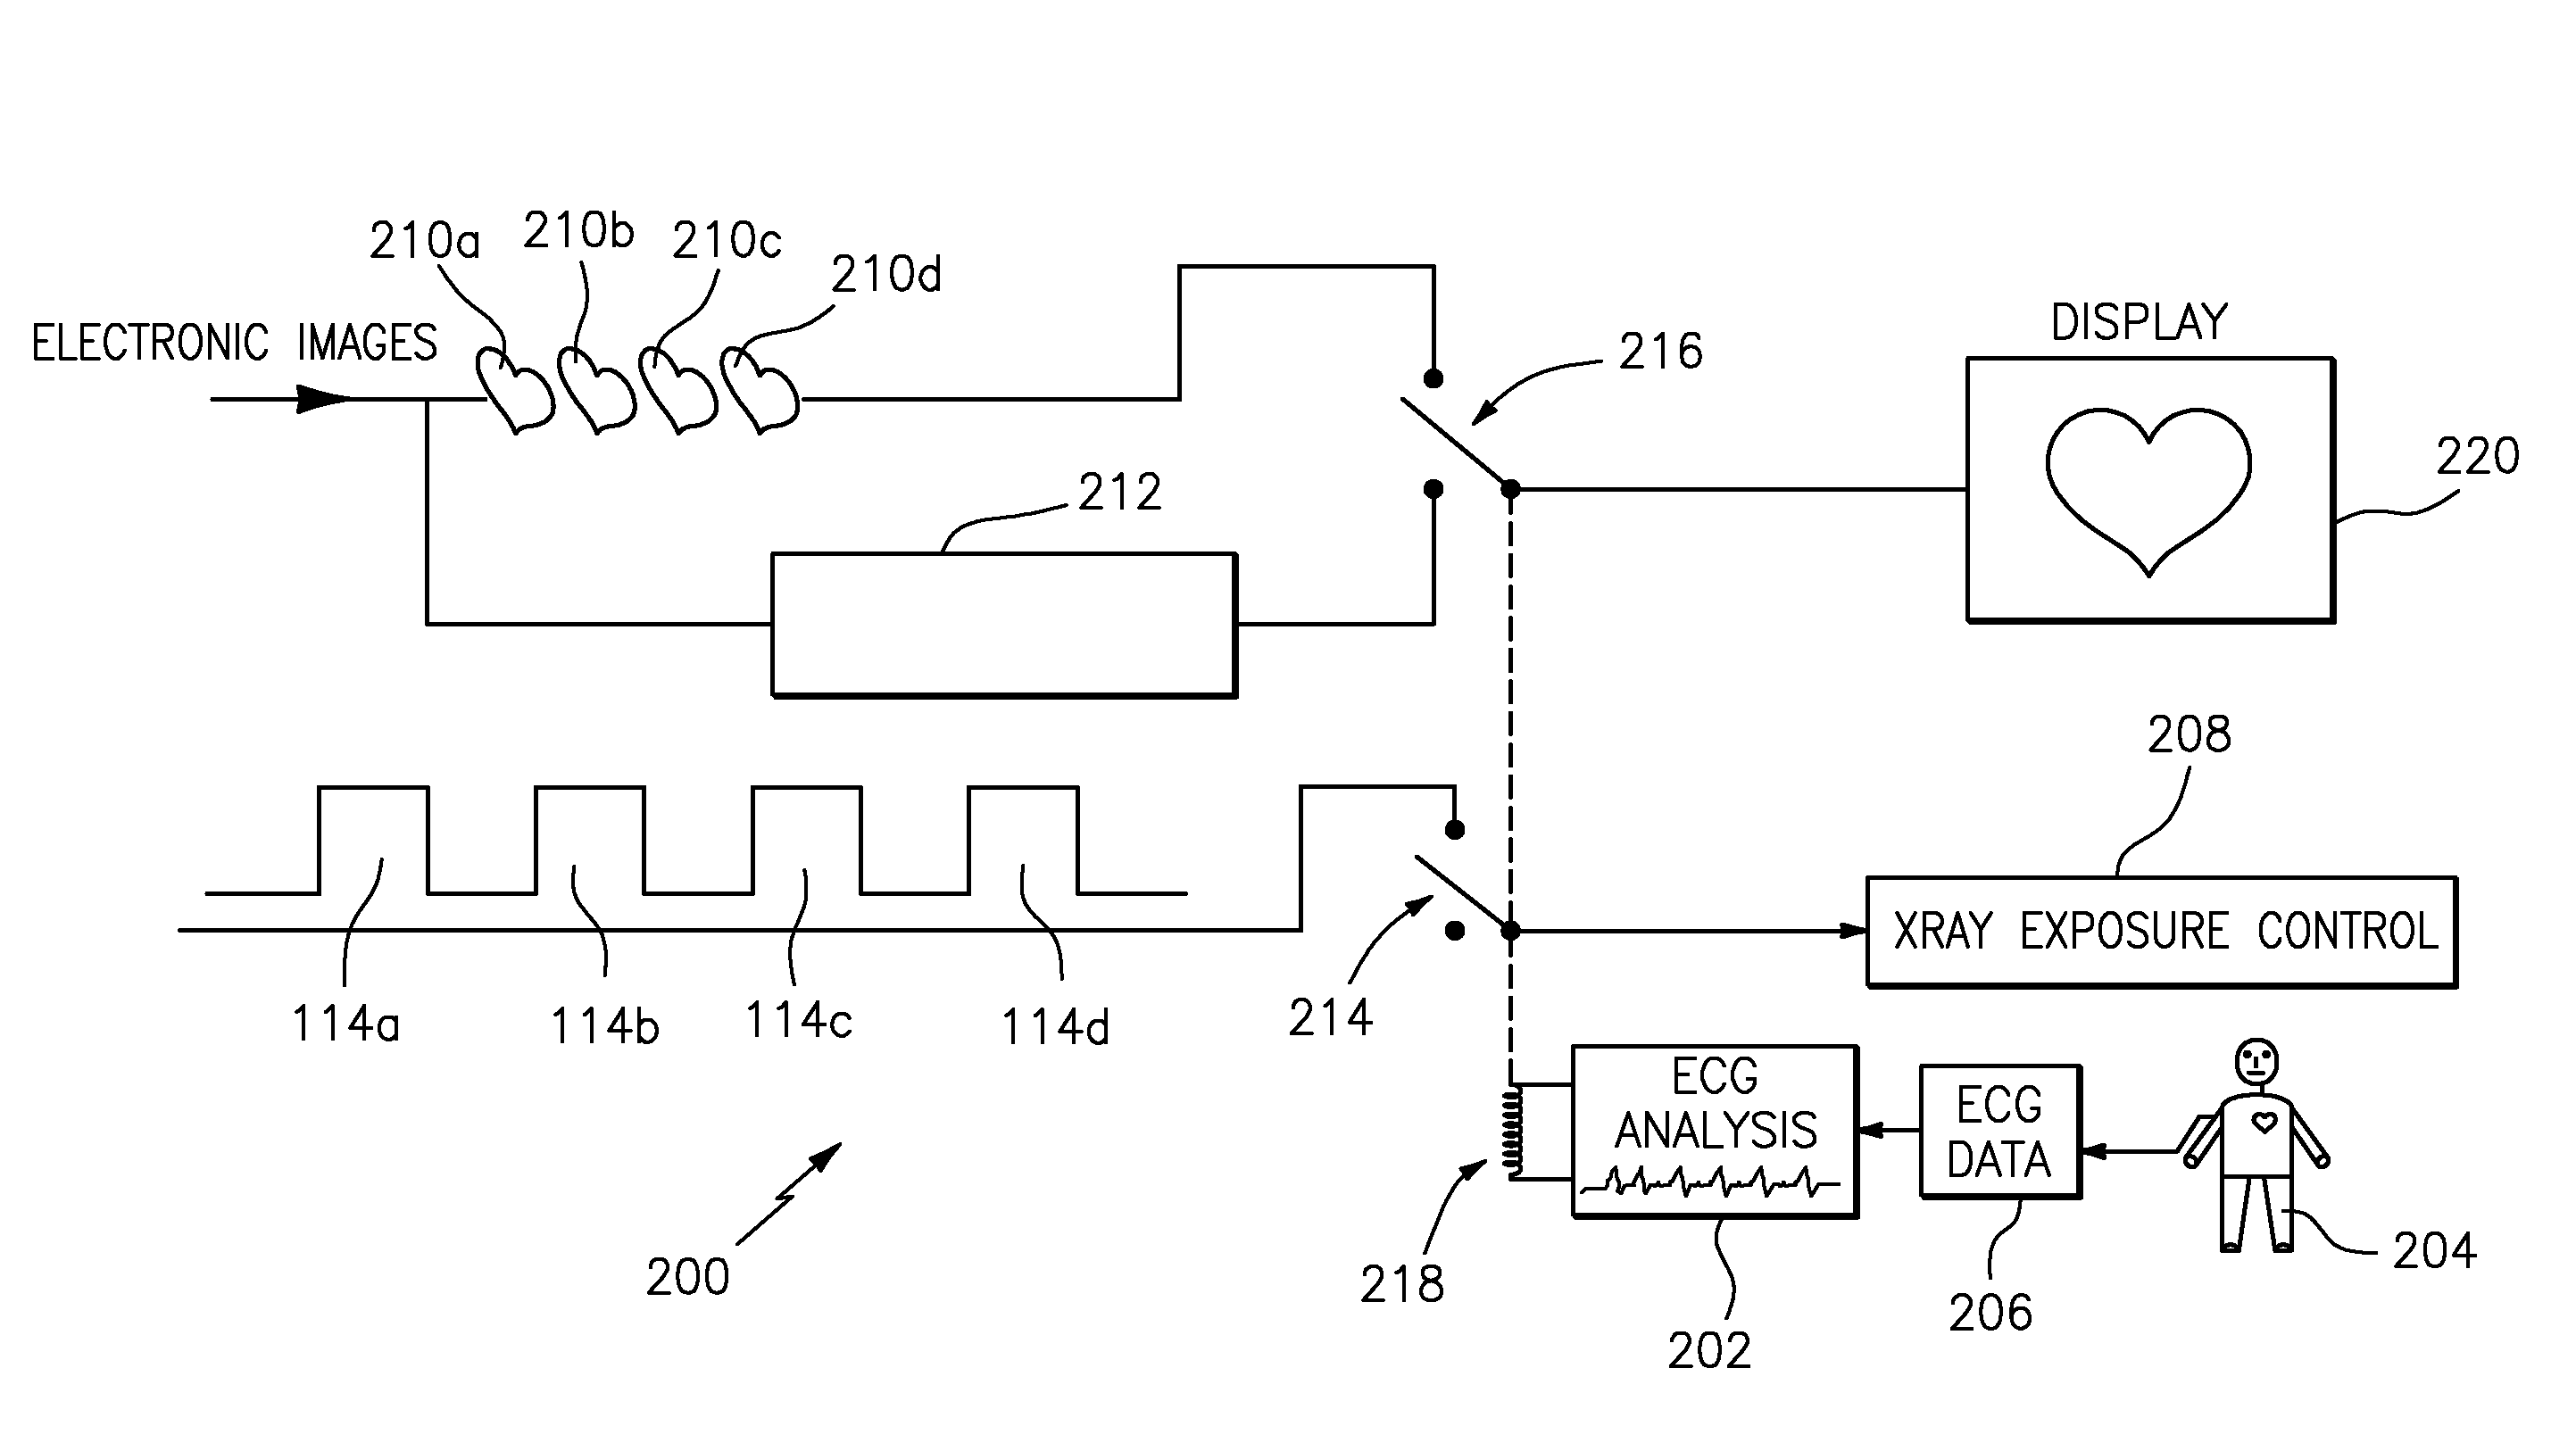 Method for removing motion from non-ct sequential x-ray images